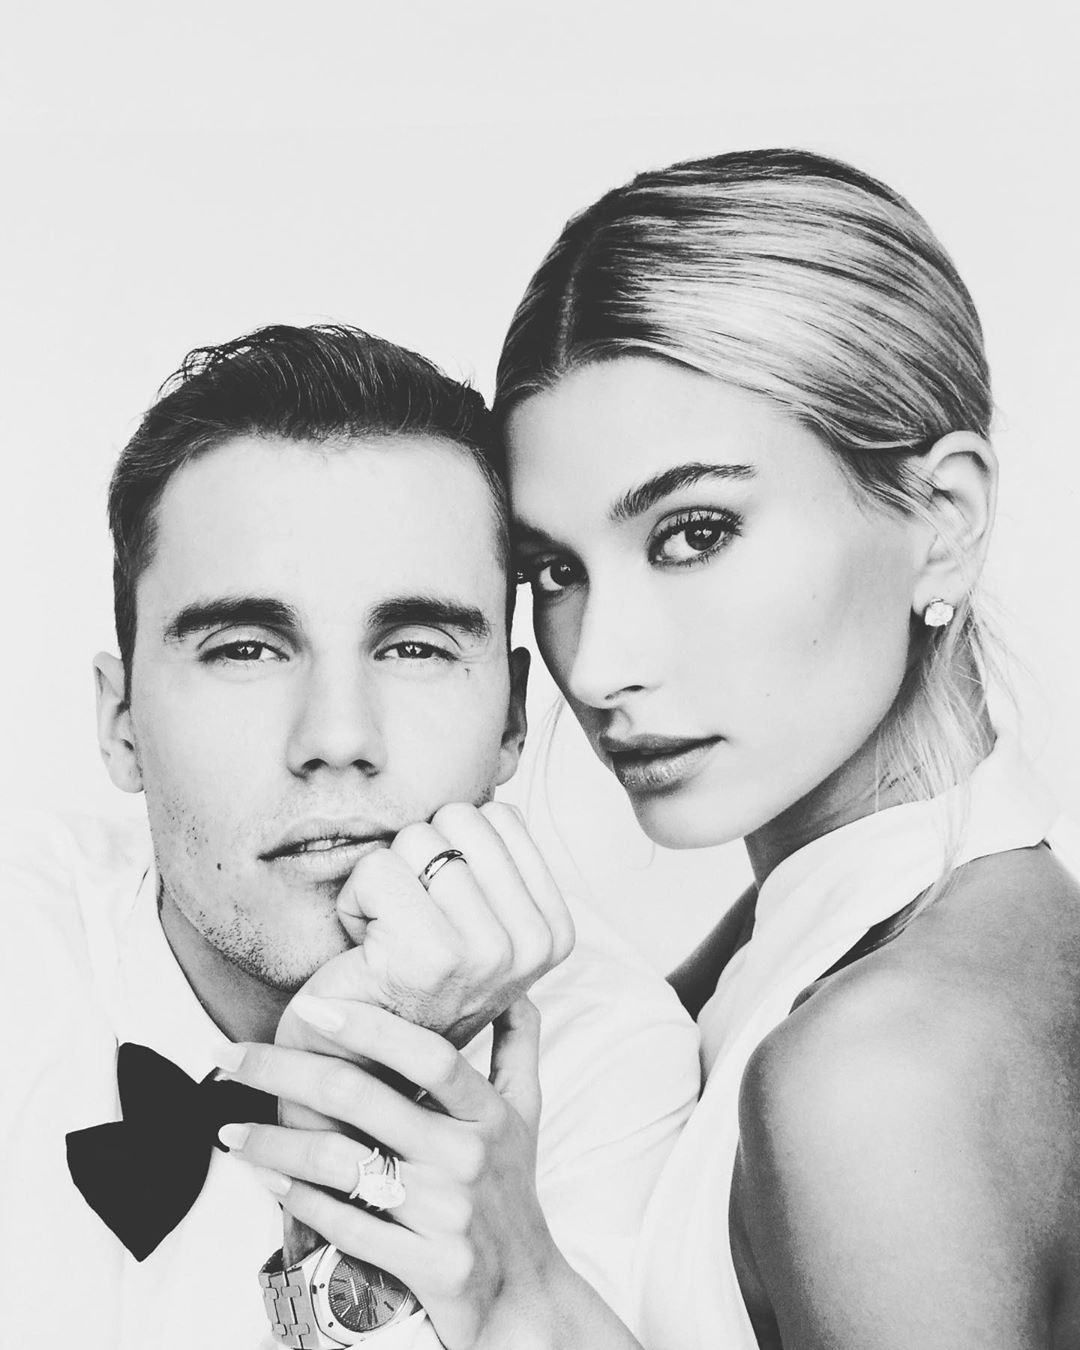 Justin Bieber and Hailey Baldwin get married for the second time, only 157 guests function